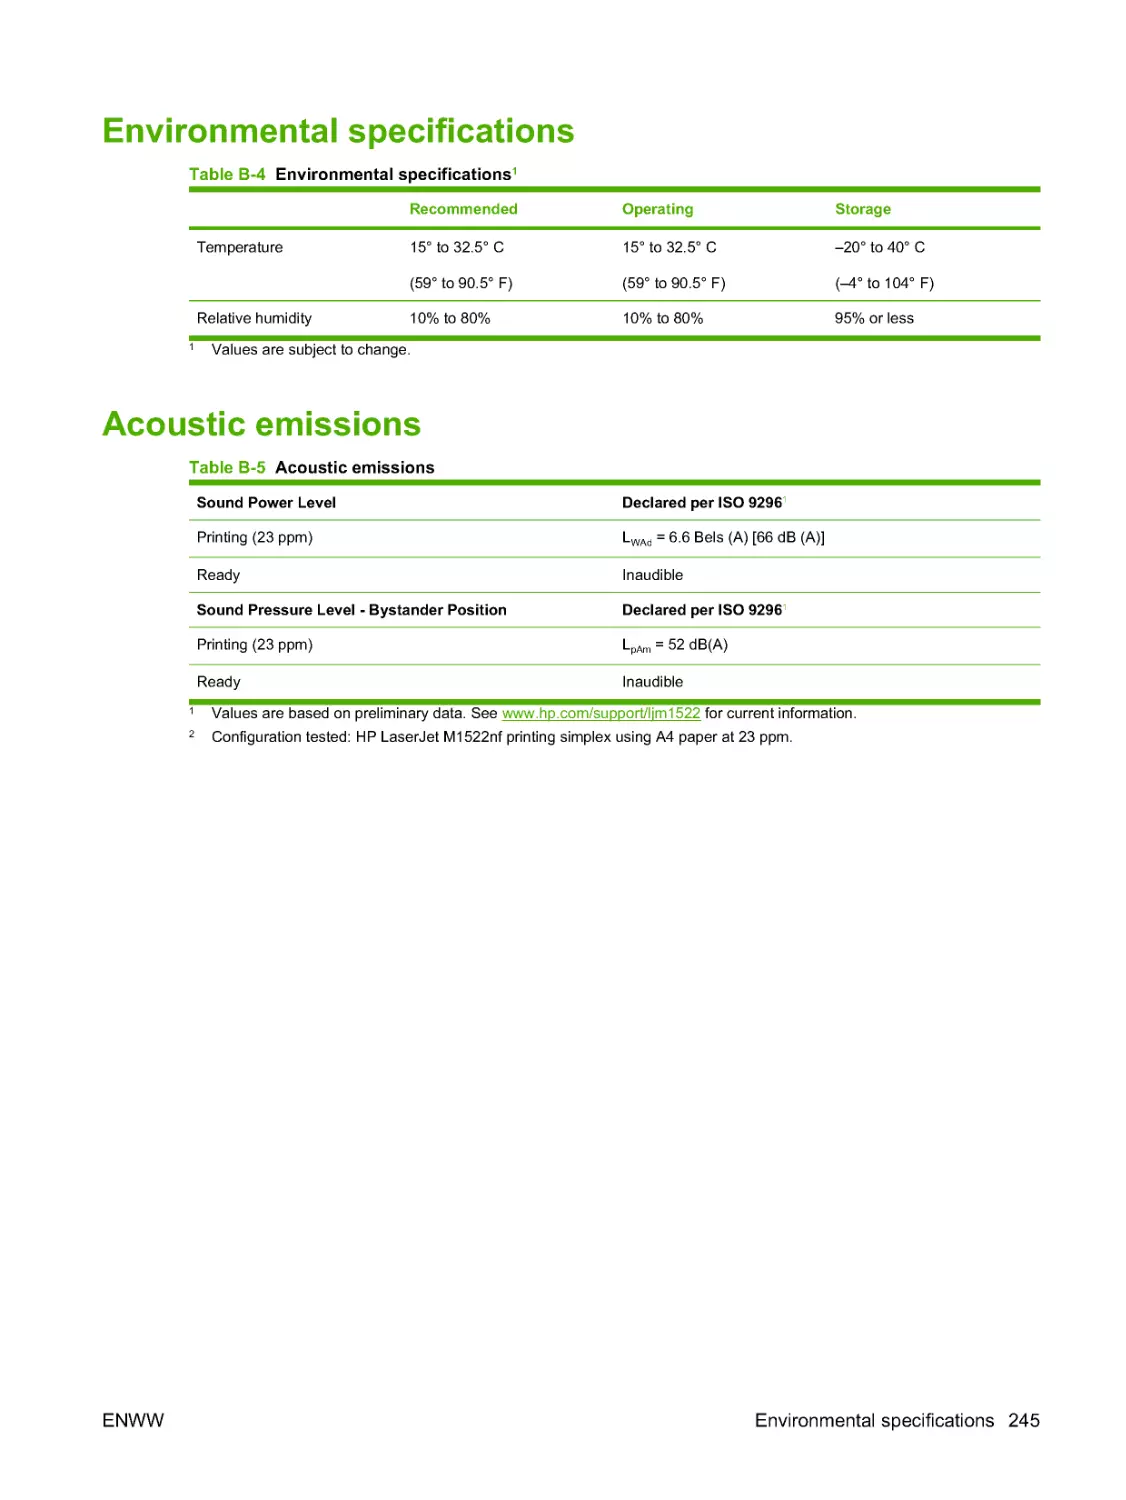 Environmental specifications
Acoustic emissions